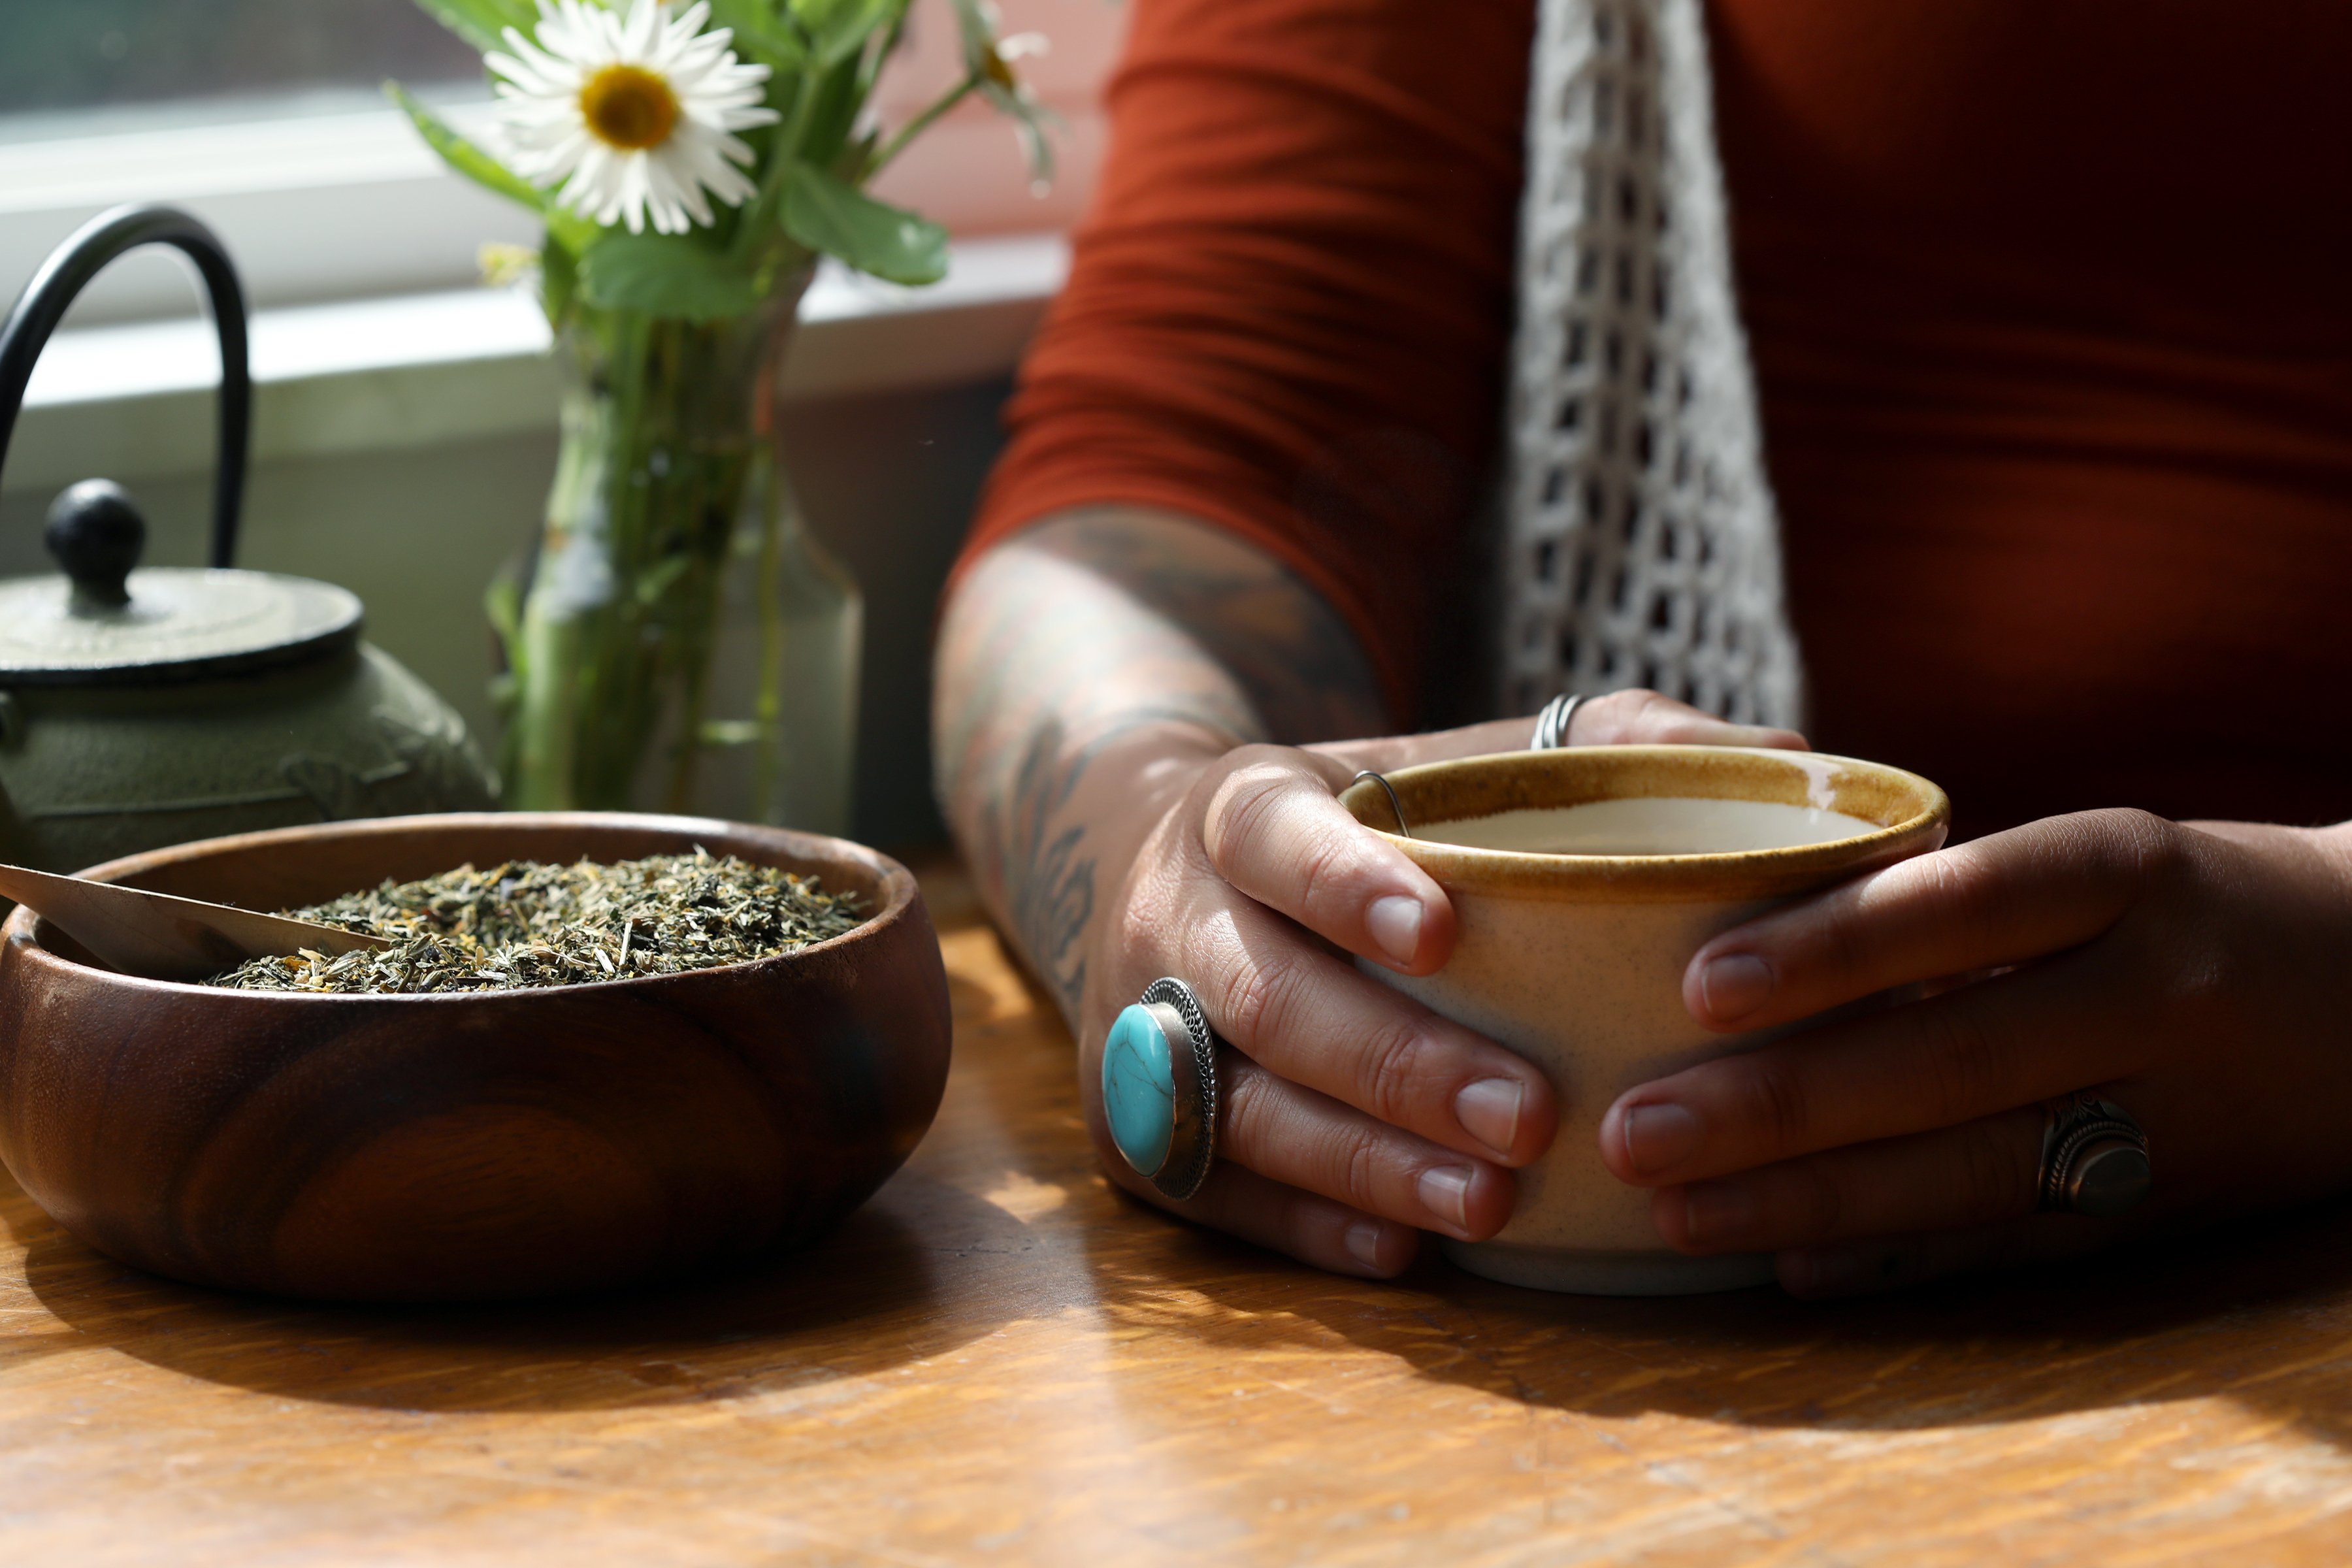 Tattoo care by drinking nettle and blossoms herbal tea. A young woman sitting with a bowl of herbs and a fresh cup of tea next to a window sill with cut flowers in bloom.